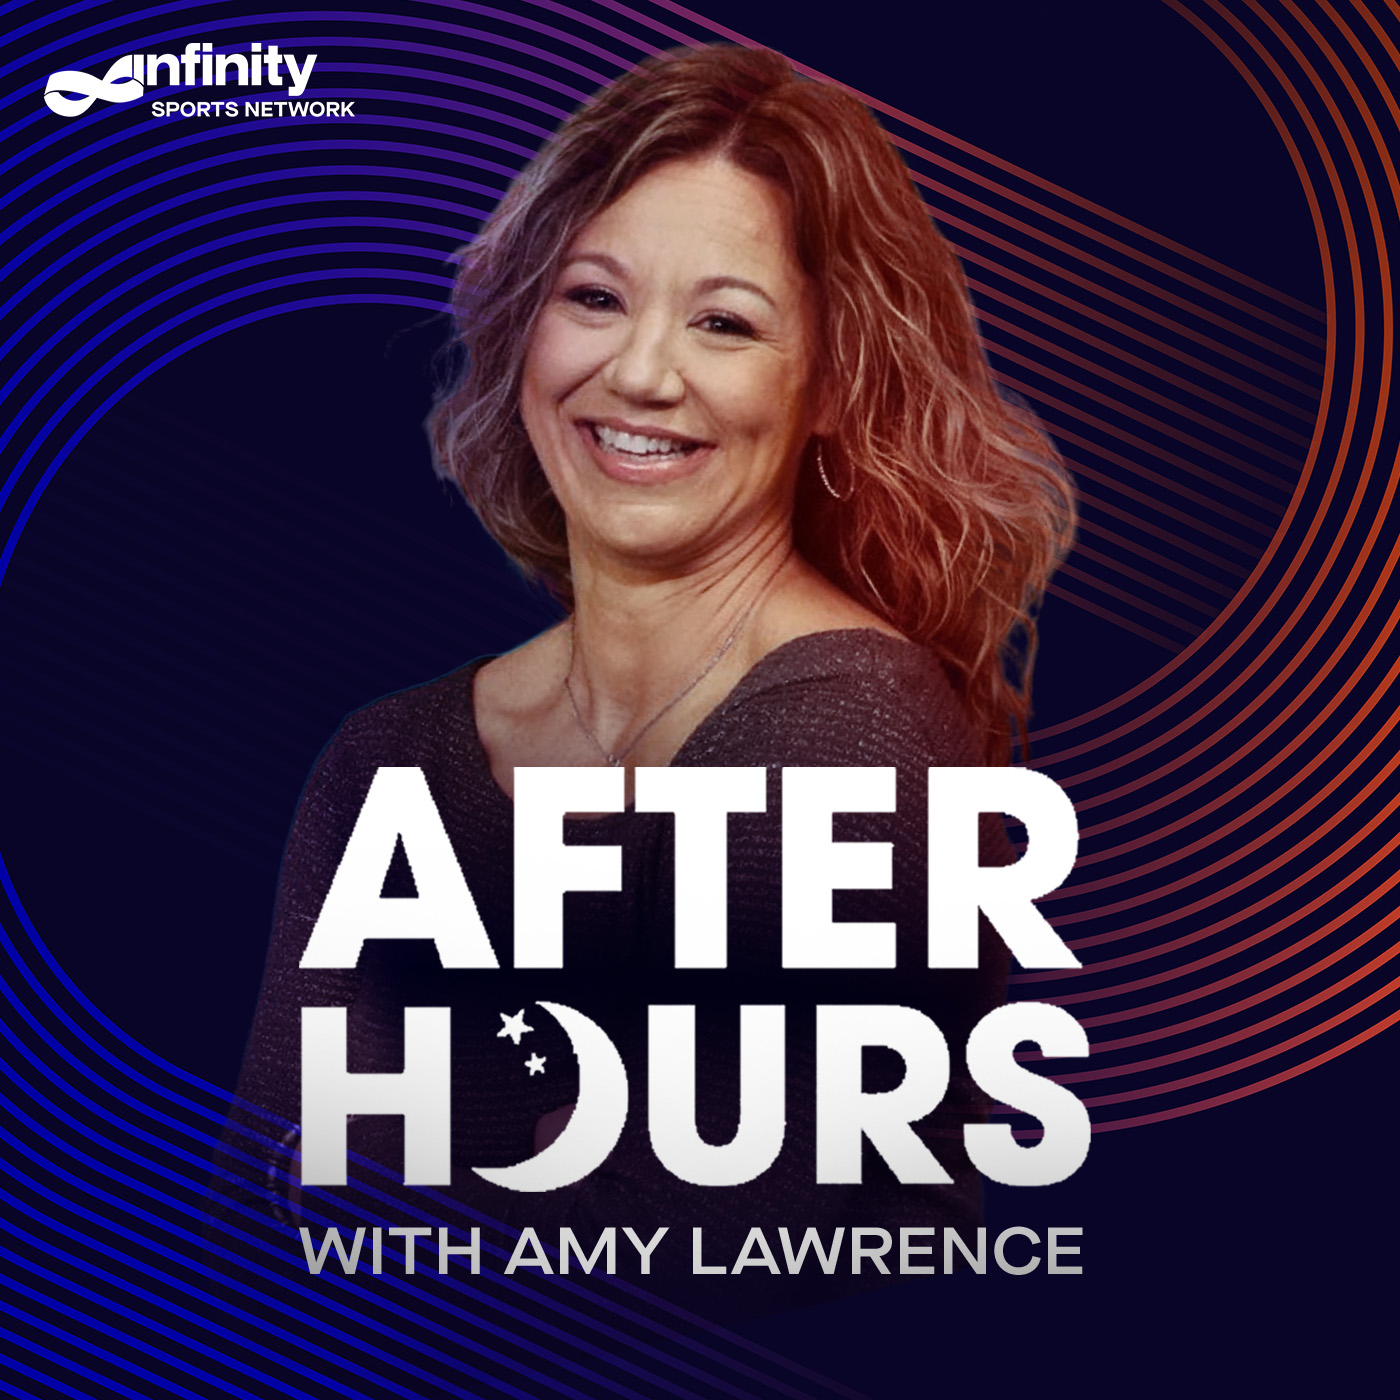 6/1/21 After Hours with Amy Lawrence PODCAST: Hour 2